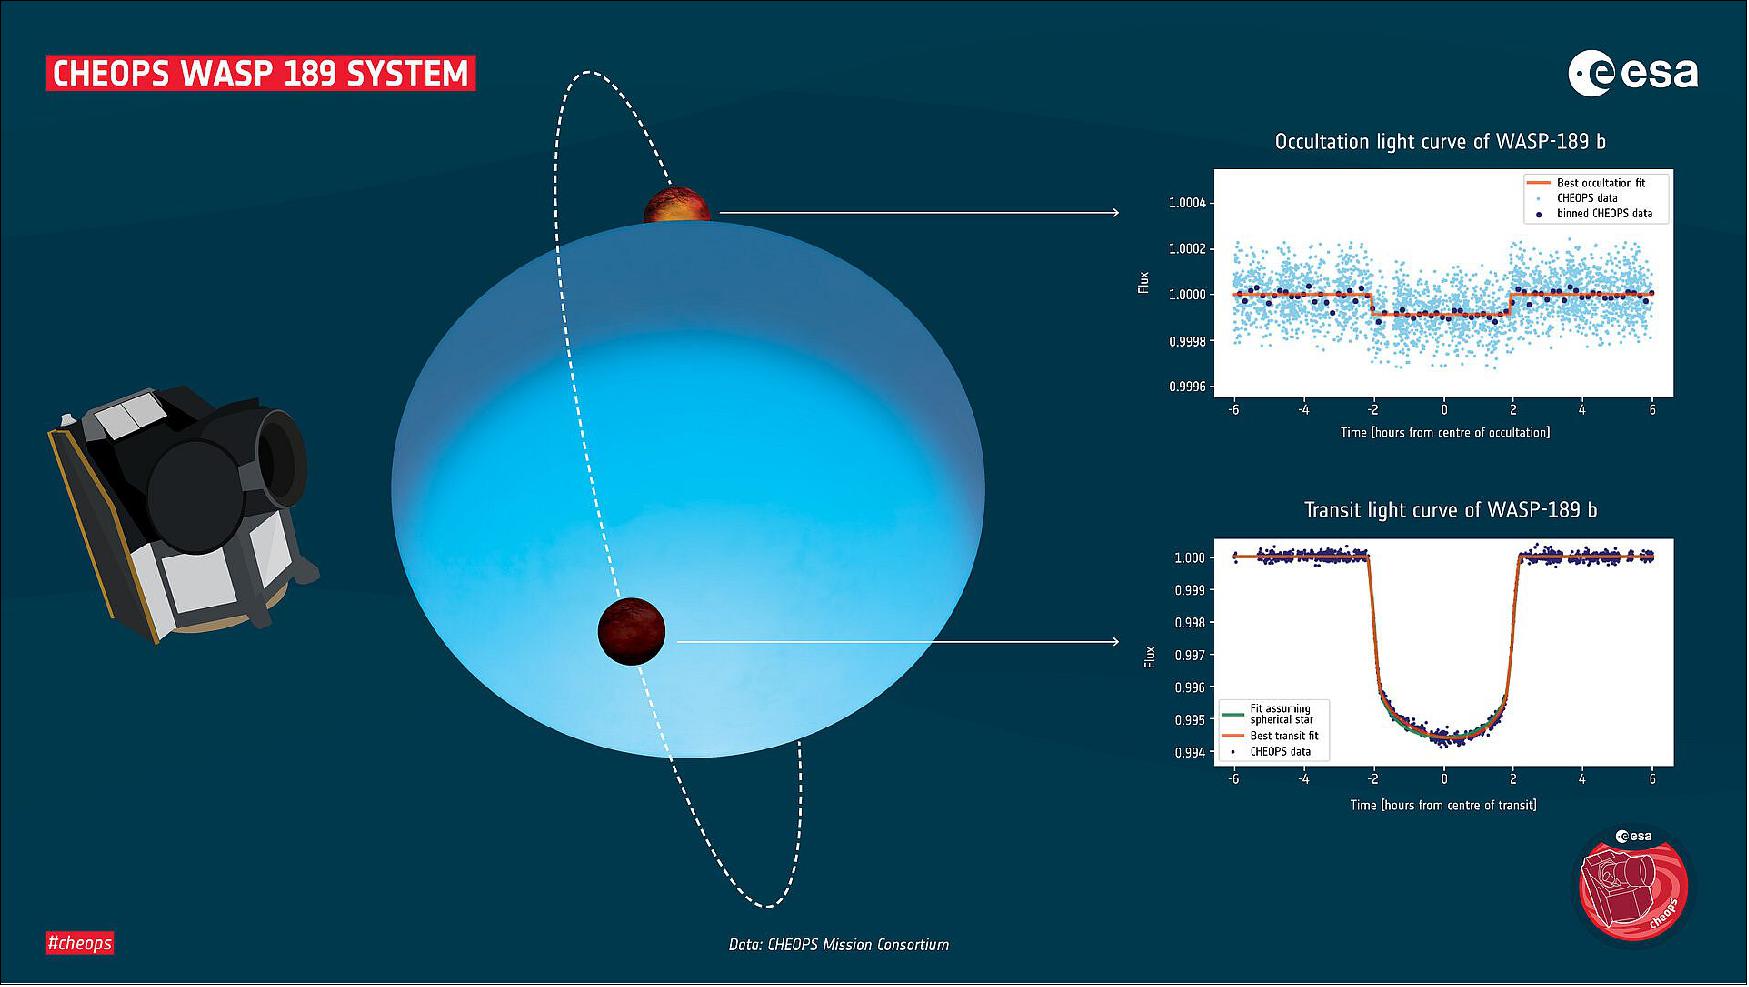 Figure 23: ESA’s exoplanet mission Cheops has observed the WASP-189 system and determined key parameters about the star and its planet, WASP-189b. Cheops observed WASP-189b at is passed behind its host star – an occultation – and recorded the dip in light from the entire system as it briefly slipped out of view. It also observed the planet passing in front of the star – a transit. During a transit the planet temporarily blocks a tiny fraction of light from the star. Occultations and transits allow scientists to determine parameters such as the planet’s brightness, size, shape and orbital characteristics, as well as information about the star (image credit: ESA)